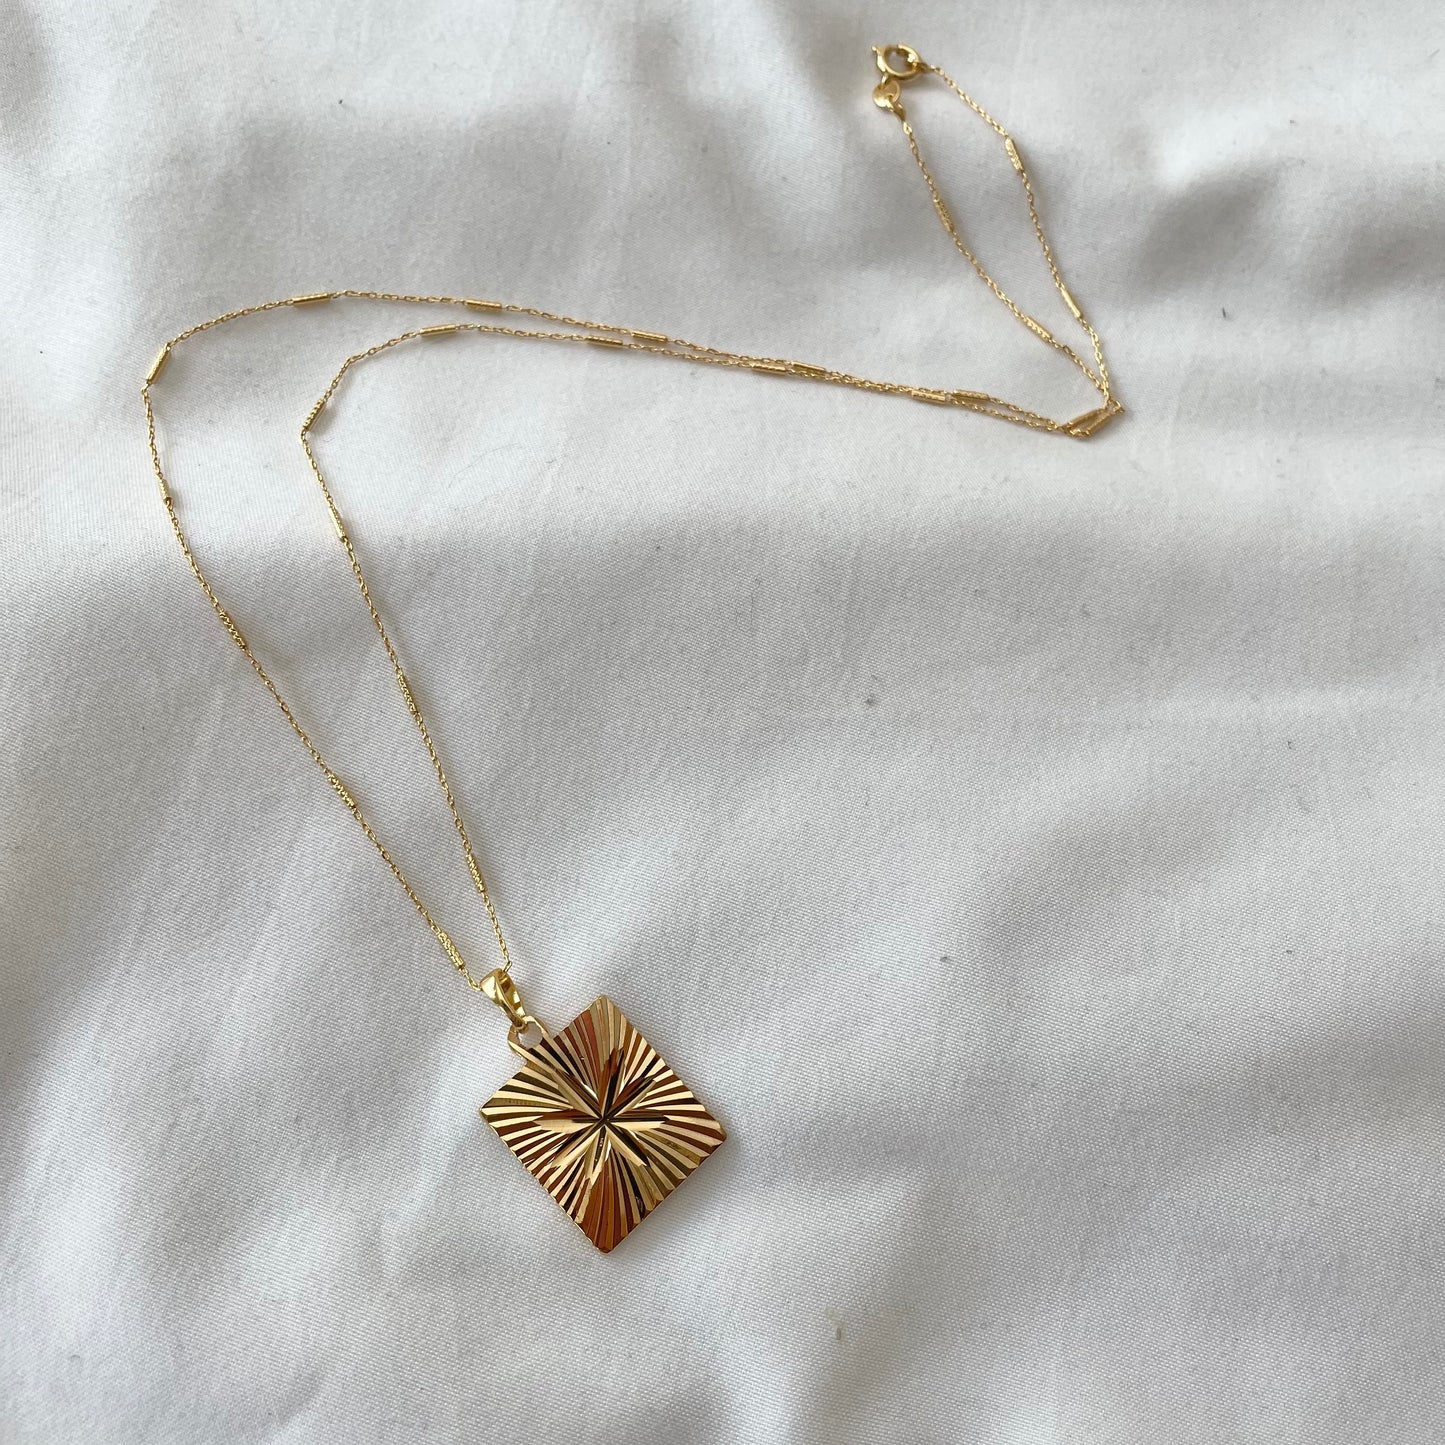 Is This Love Star Pendant Necklace